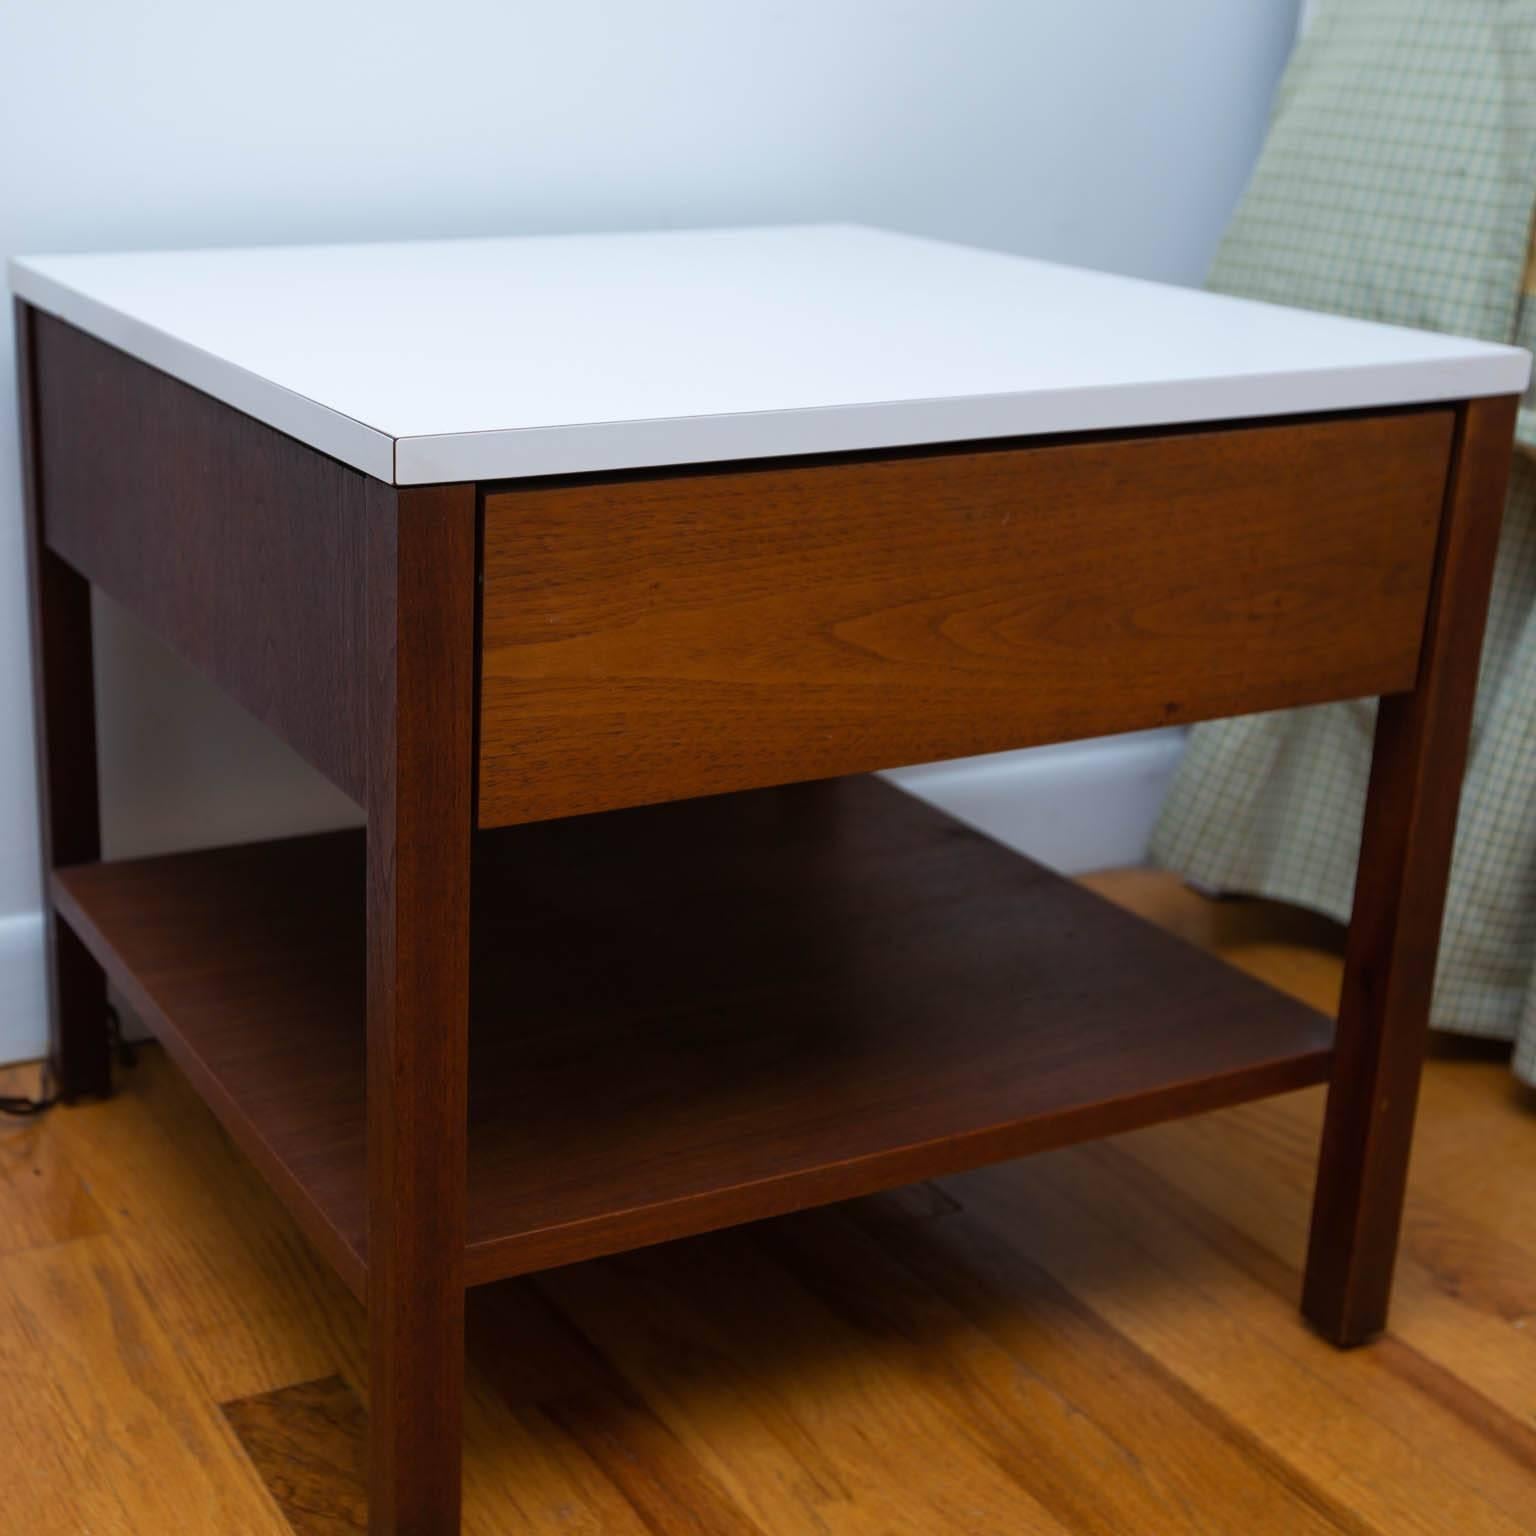 Early 1960s pair of walnut single drawer nightstands or end tables with white laminate tops.